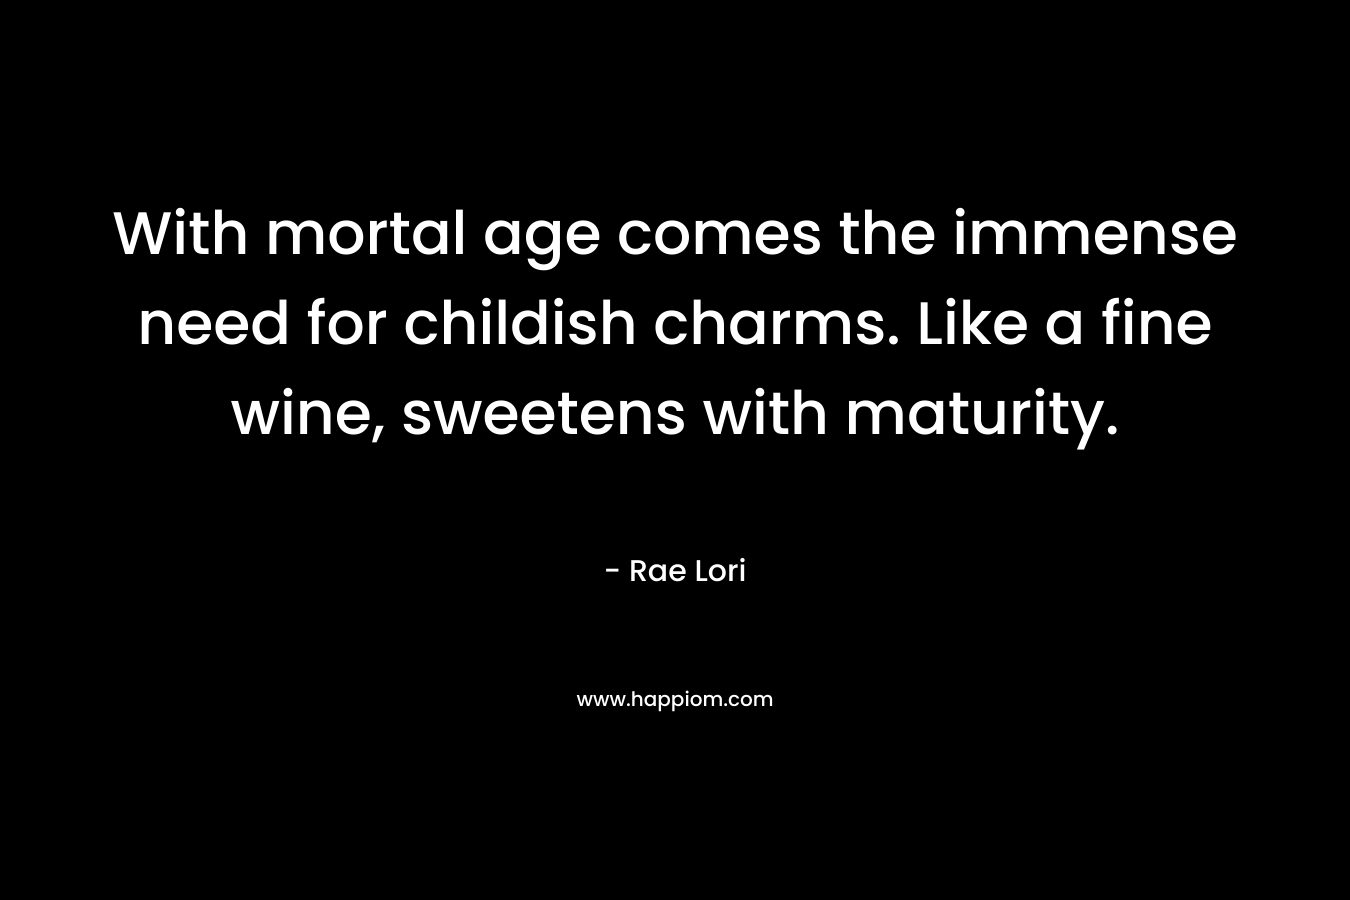 With mortal age comes the immense need for childish charms. Like a fine wine, sweetens with maturity. – Rae Lori